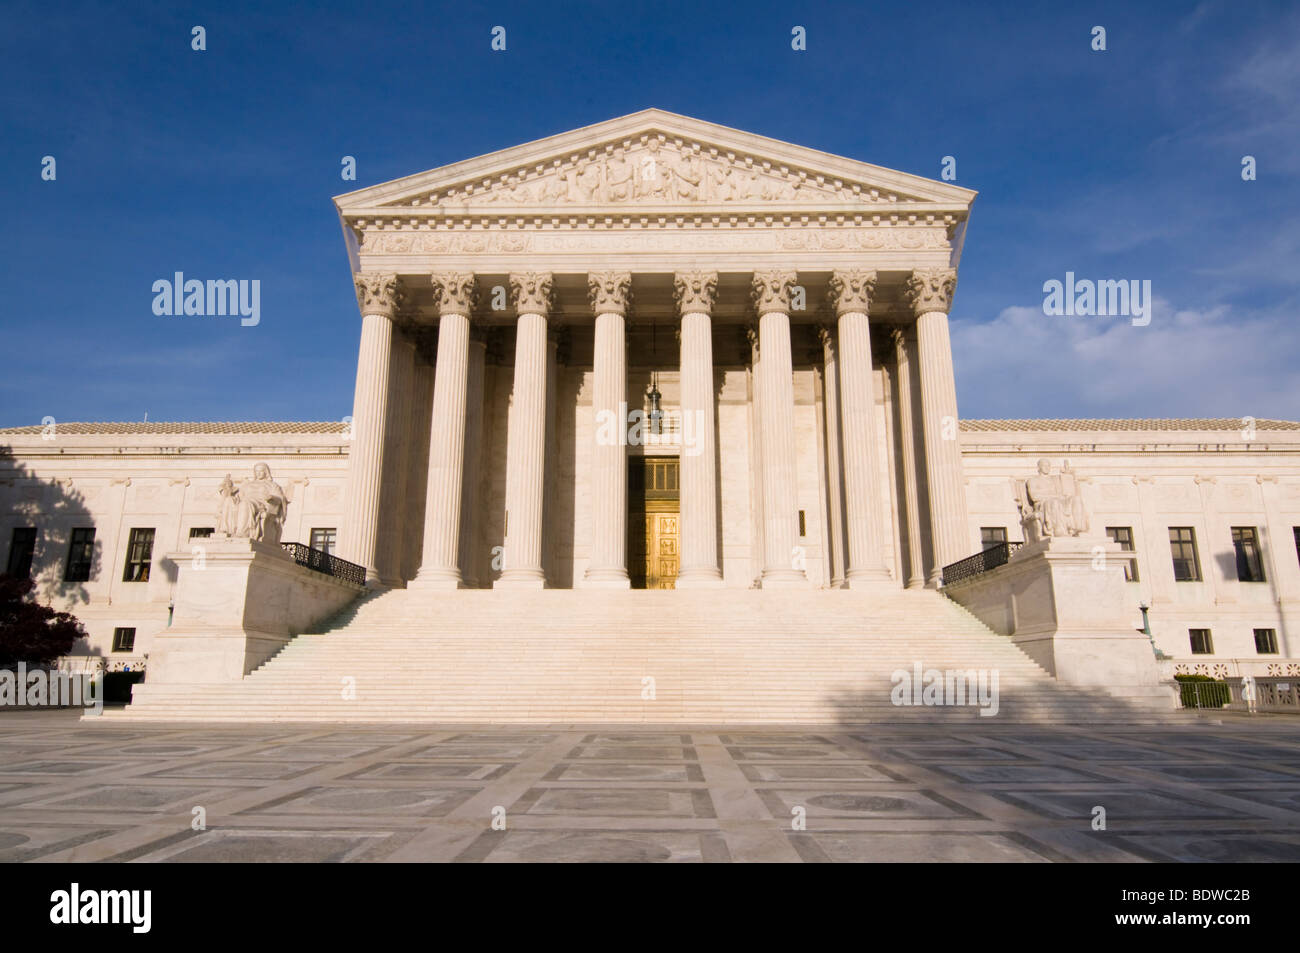 The steps of the United States Supreme Court building bathed in late afternoon sunlight. Stock Photo